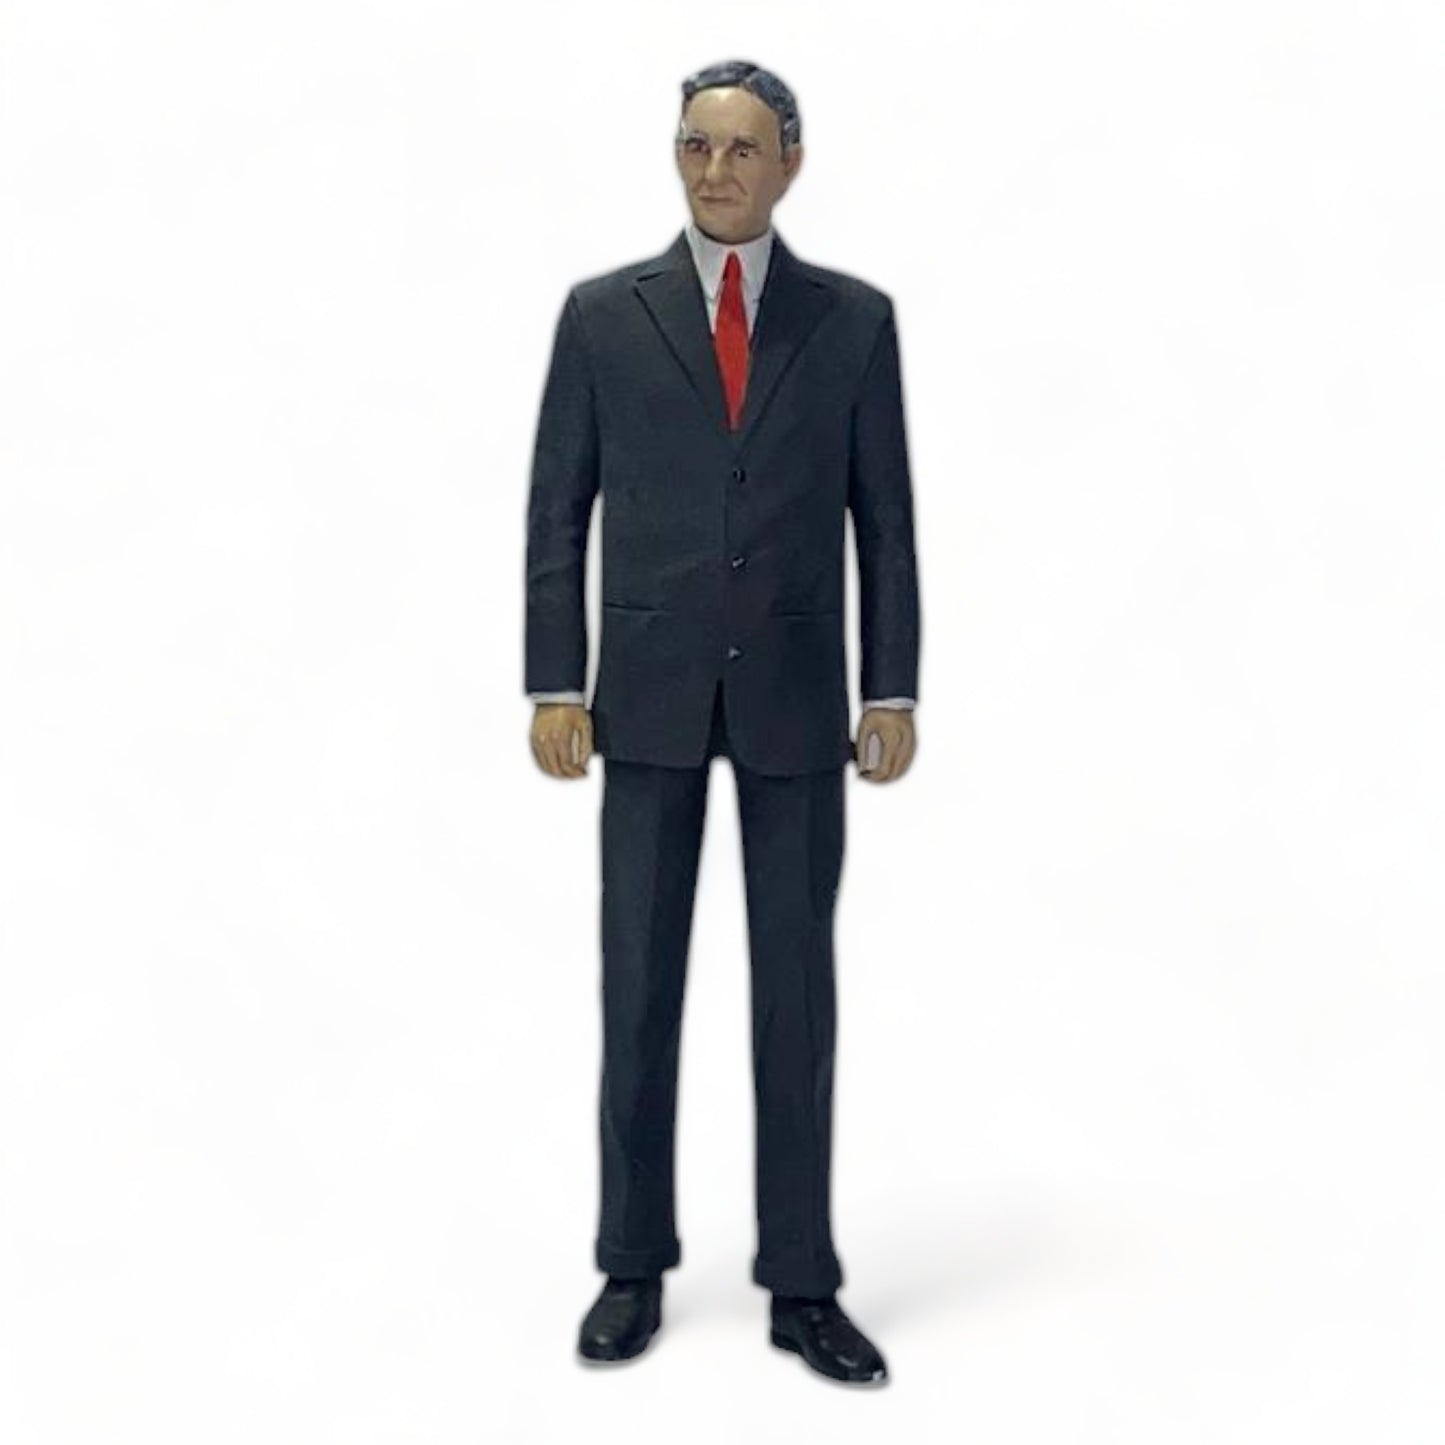 1/18 Scale Figure - Henry Ford